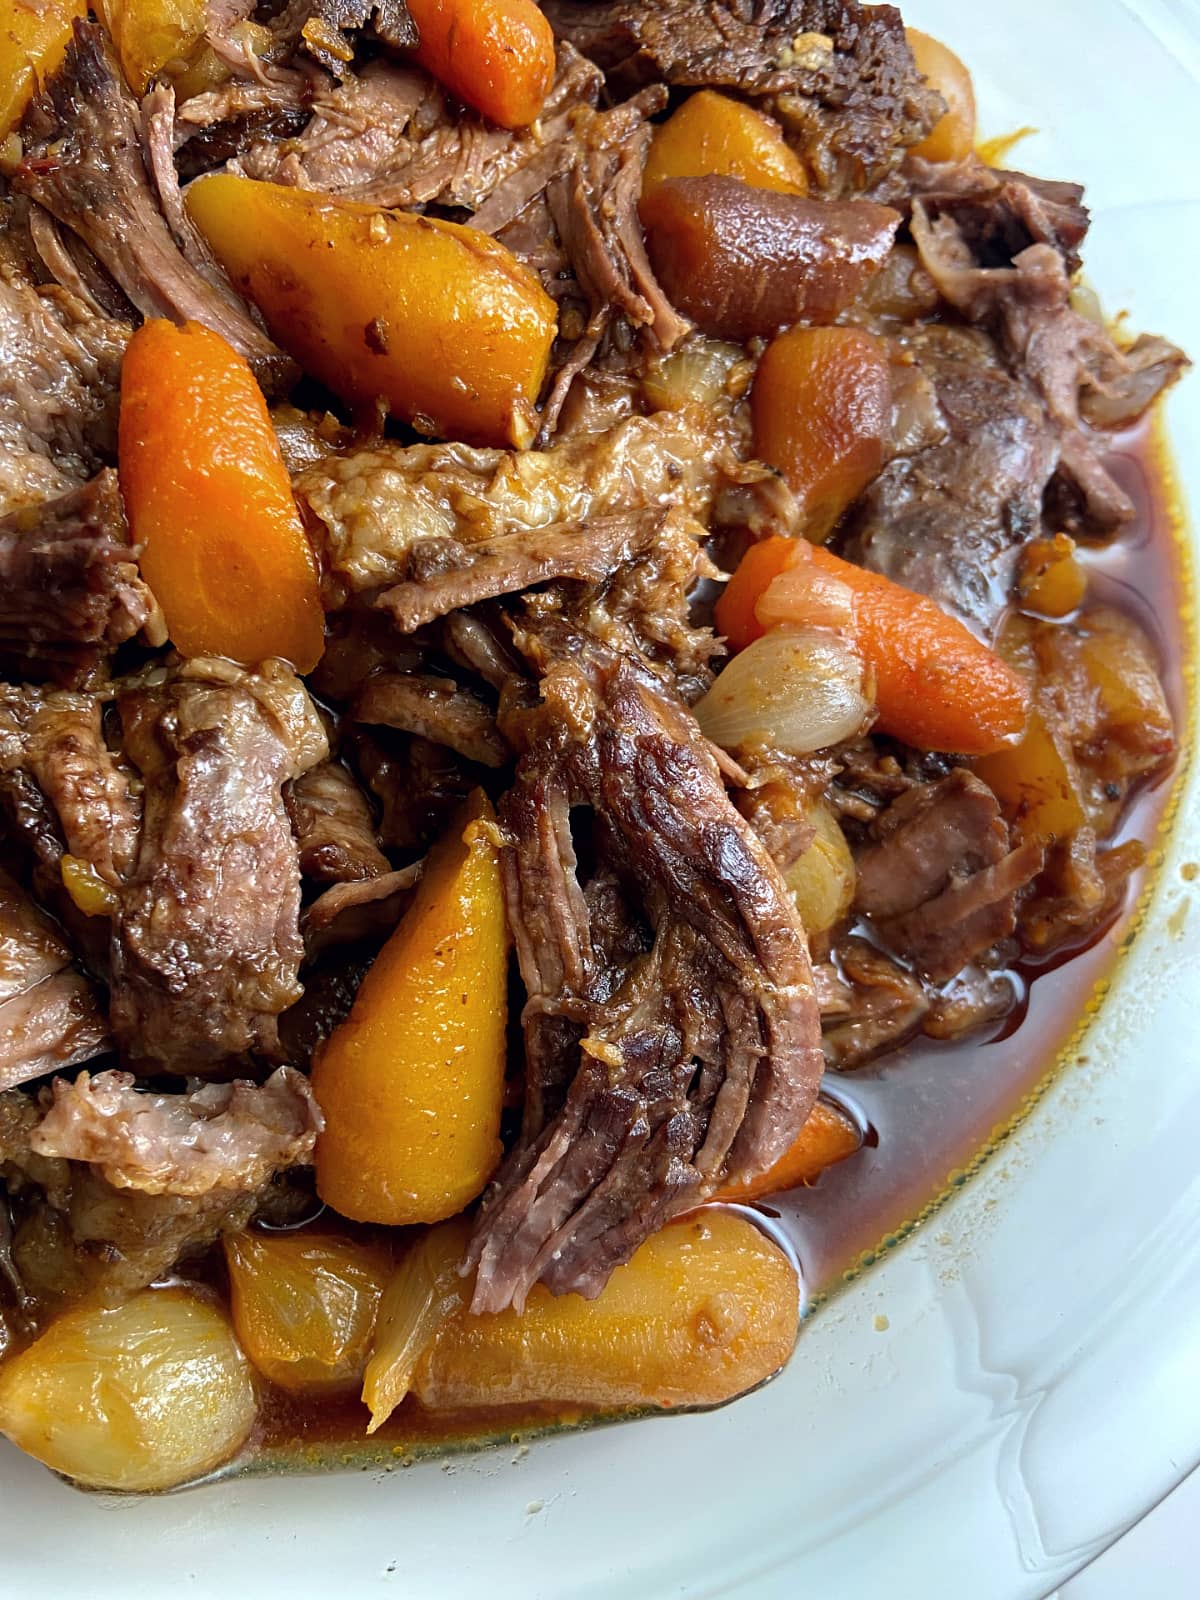 peace corps pot roast with baby vegetables